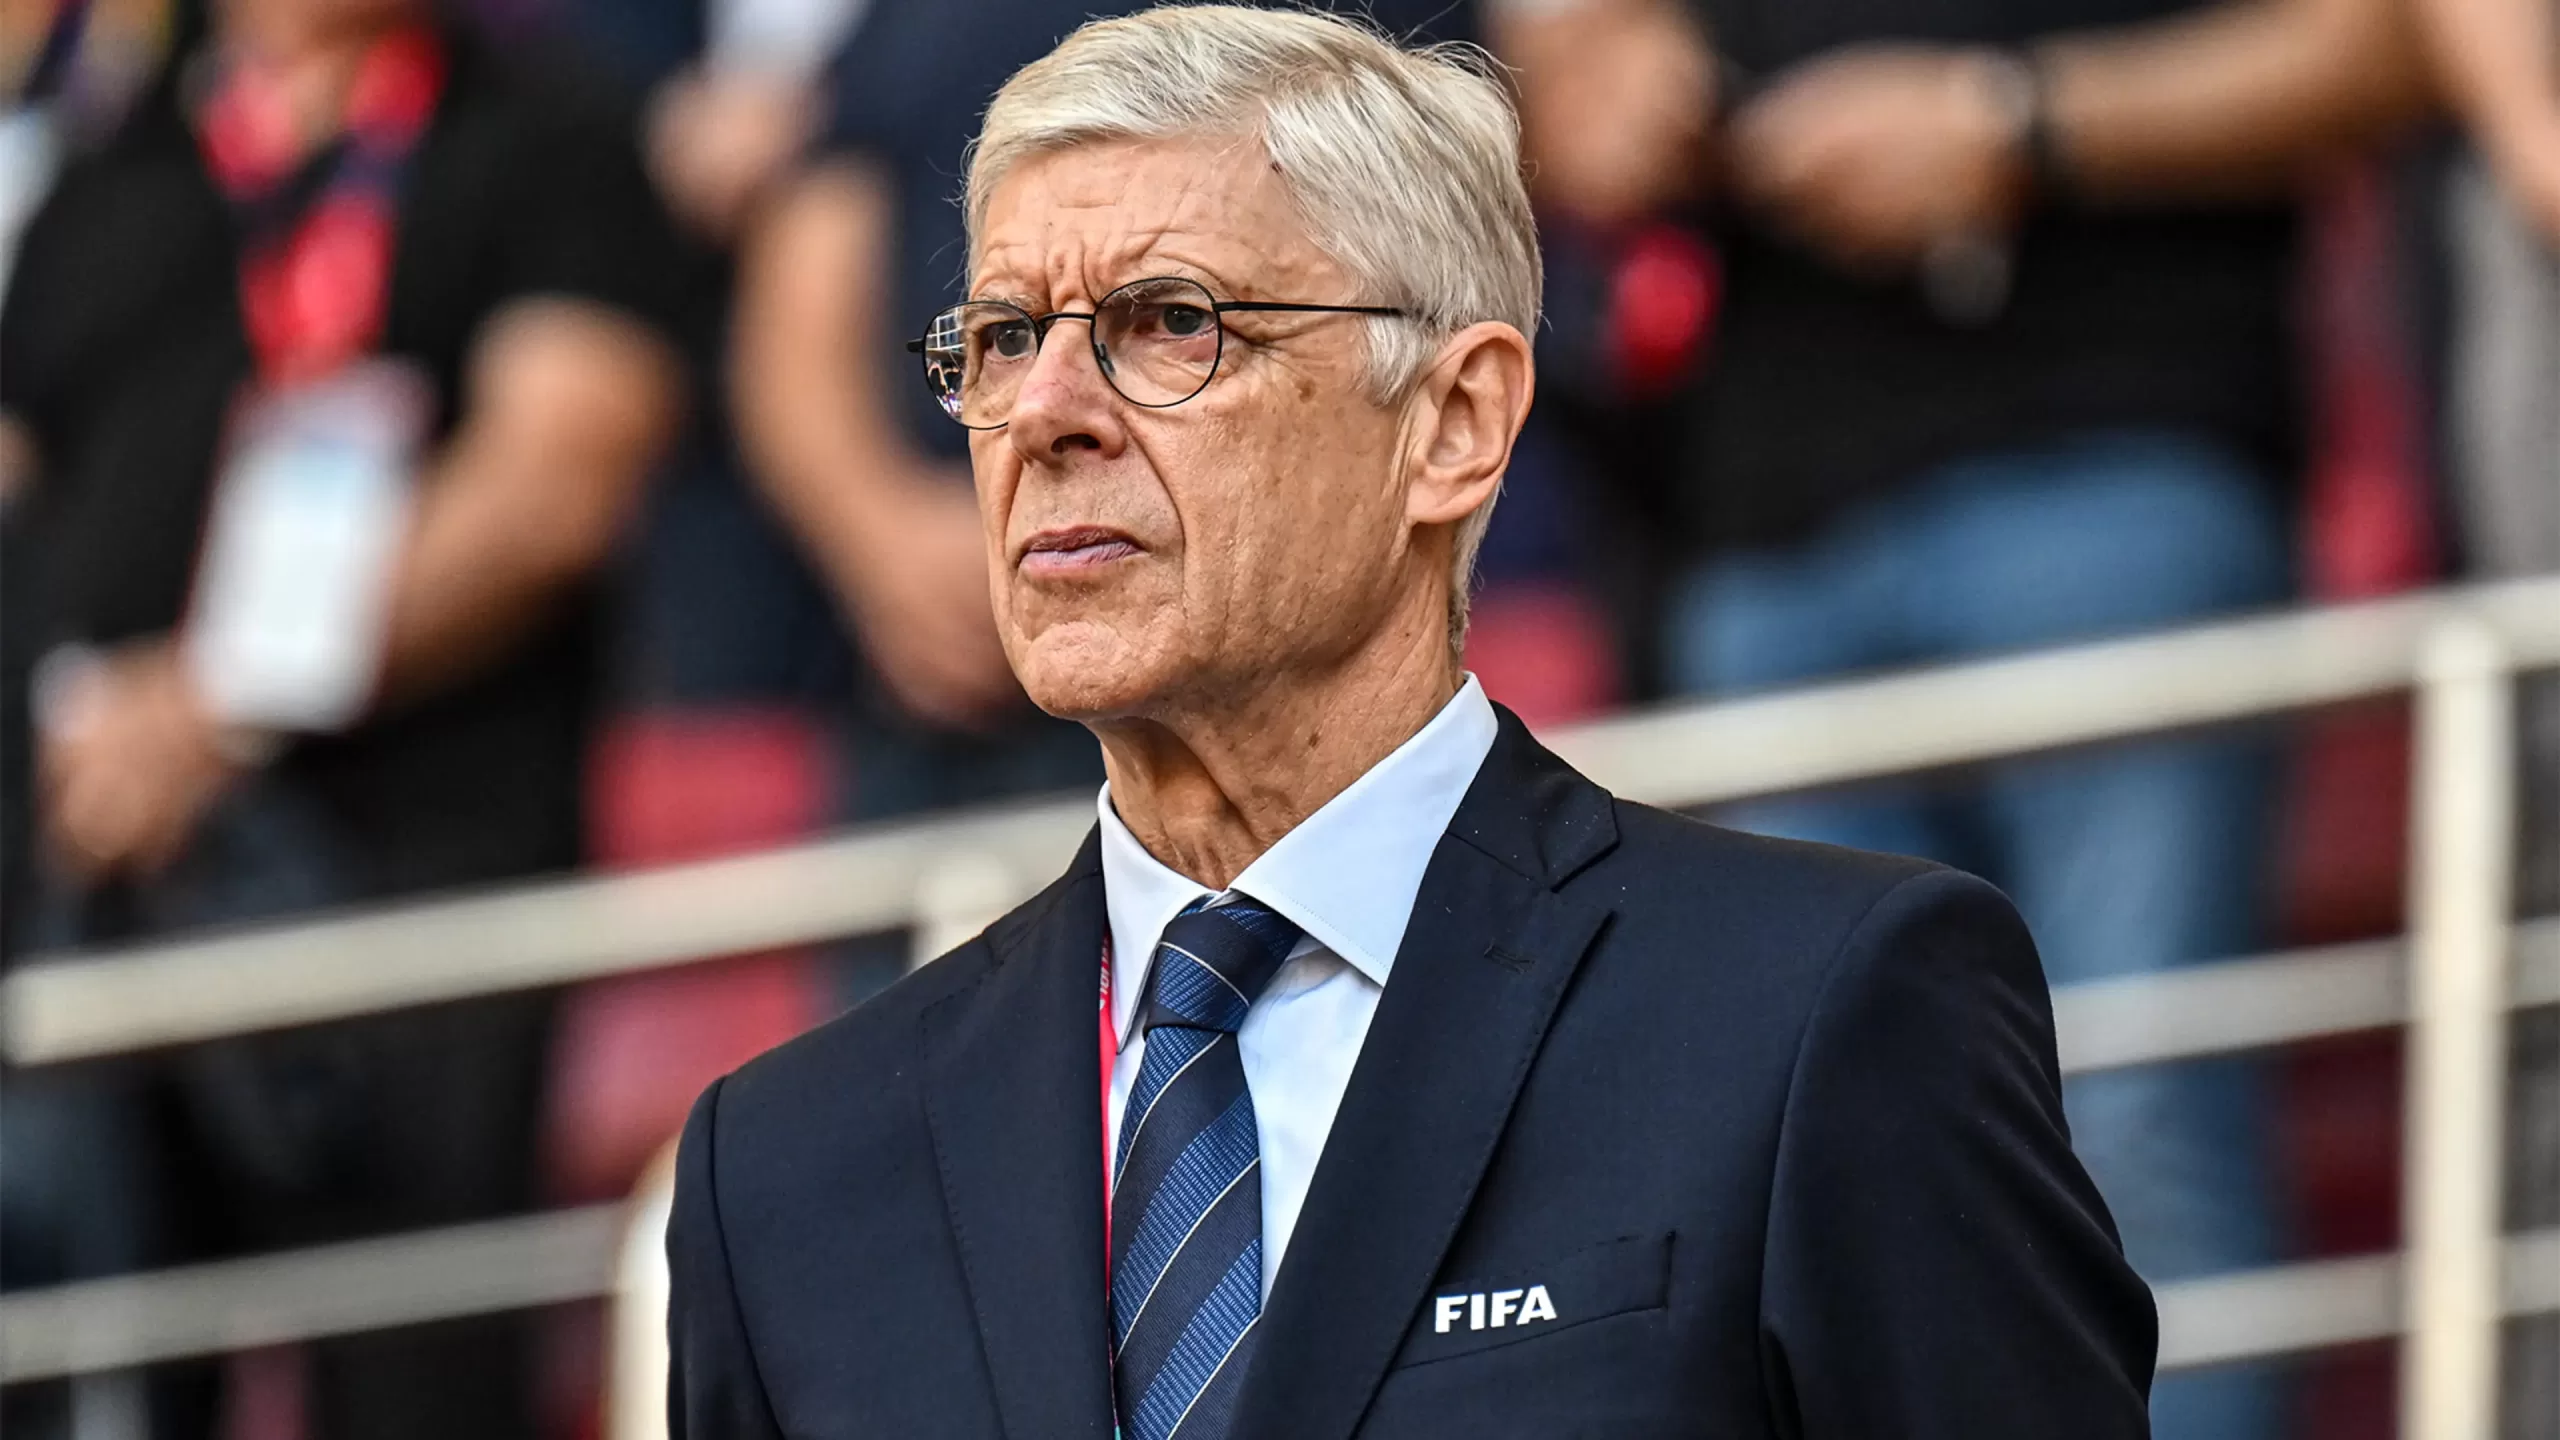 FIFA is planning to establish 75 academies worldwide, particularly in Africa, says Arsene Wenger